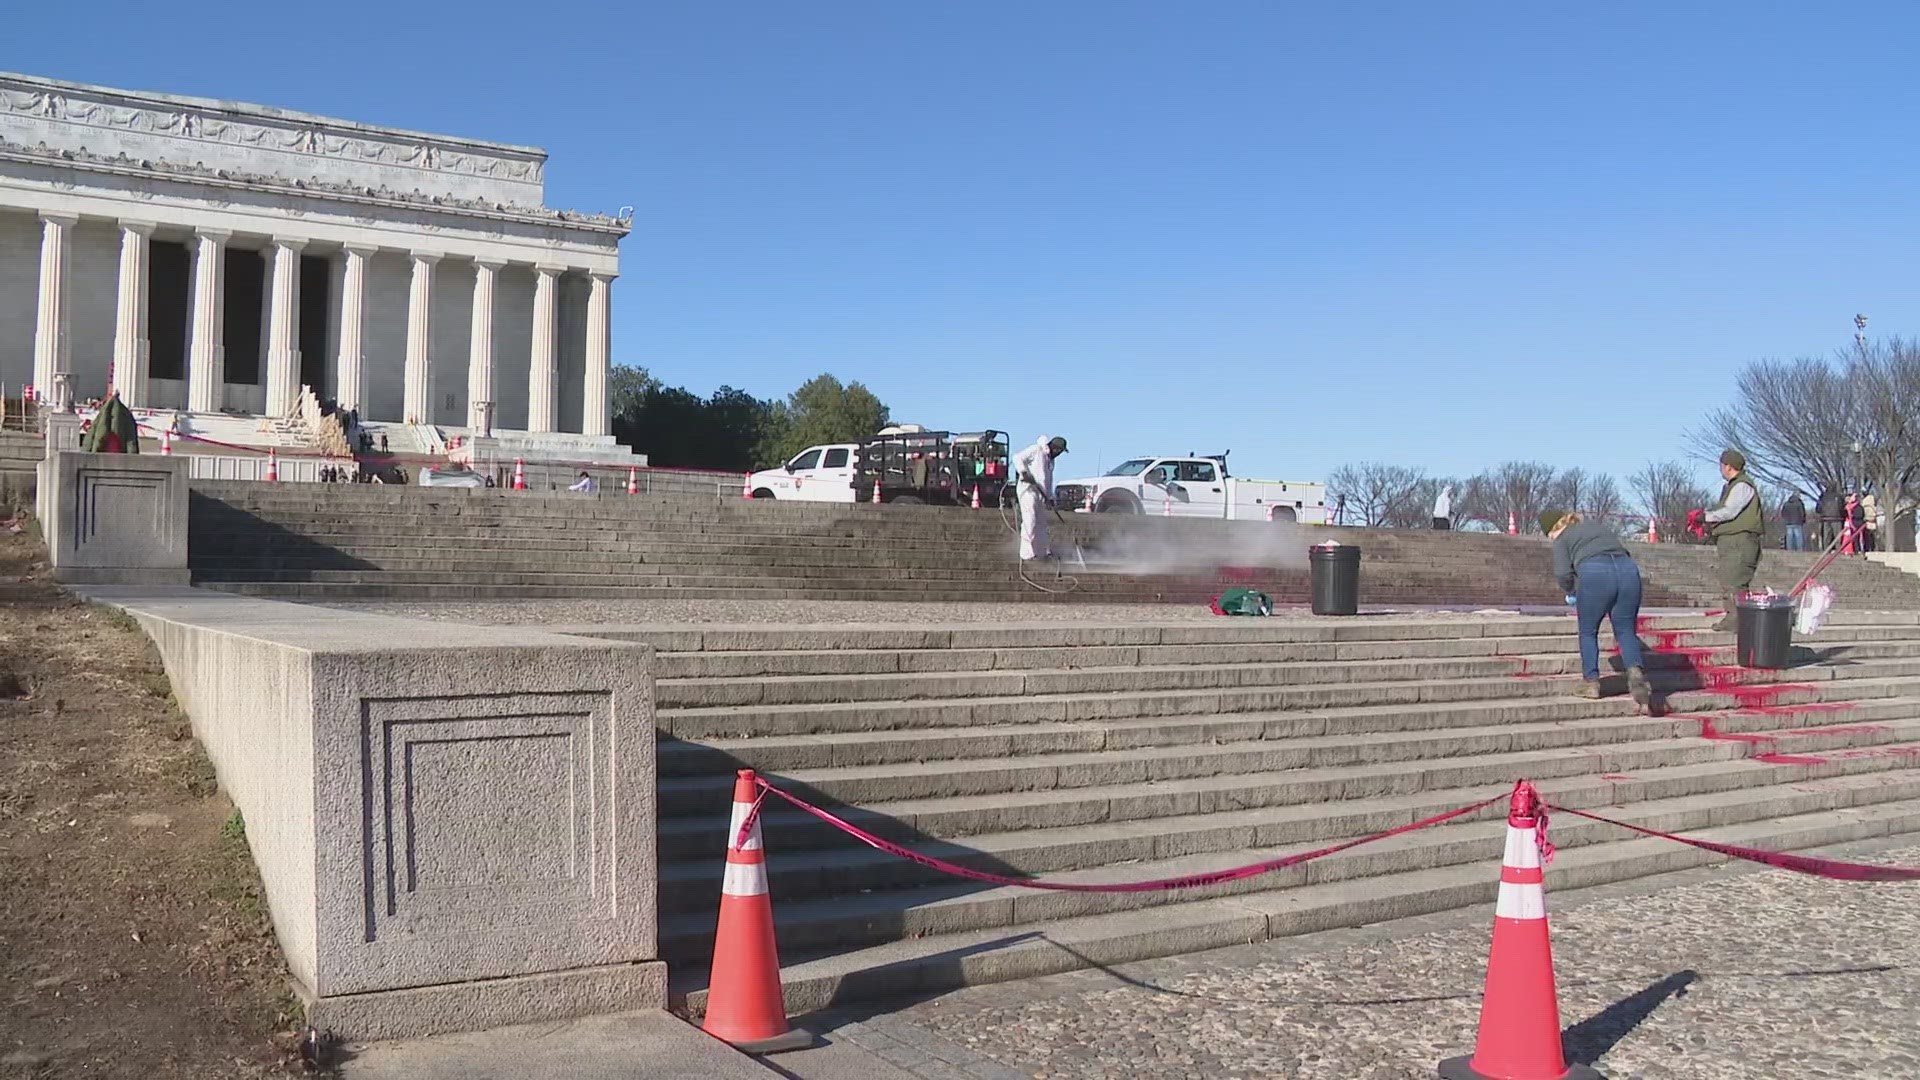 Park Police say cleaning up the steps could take several days.